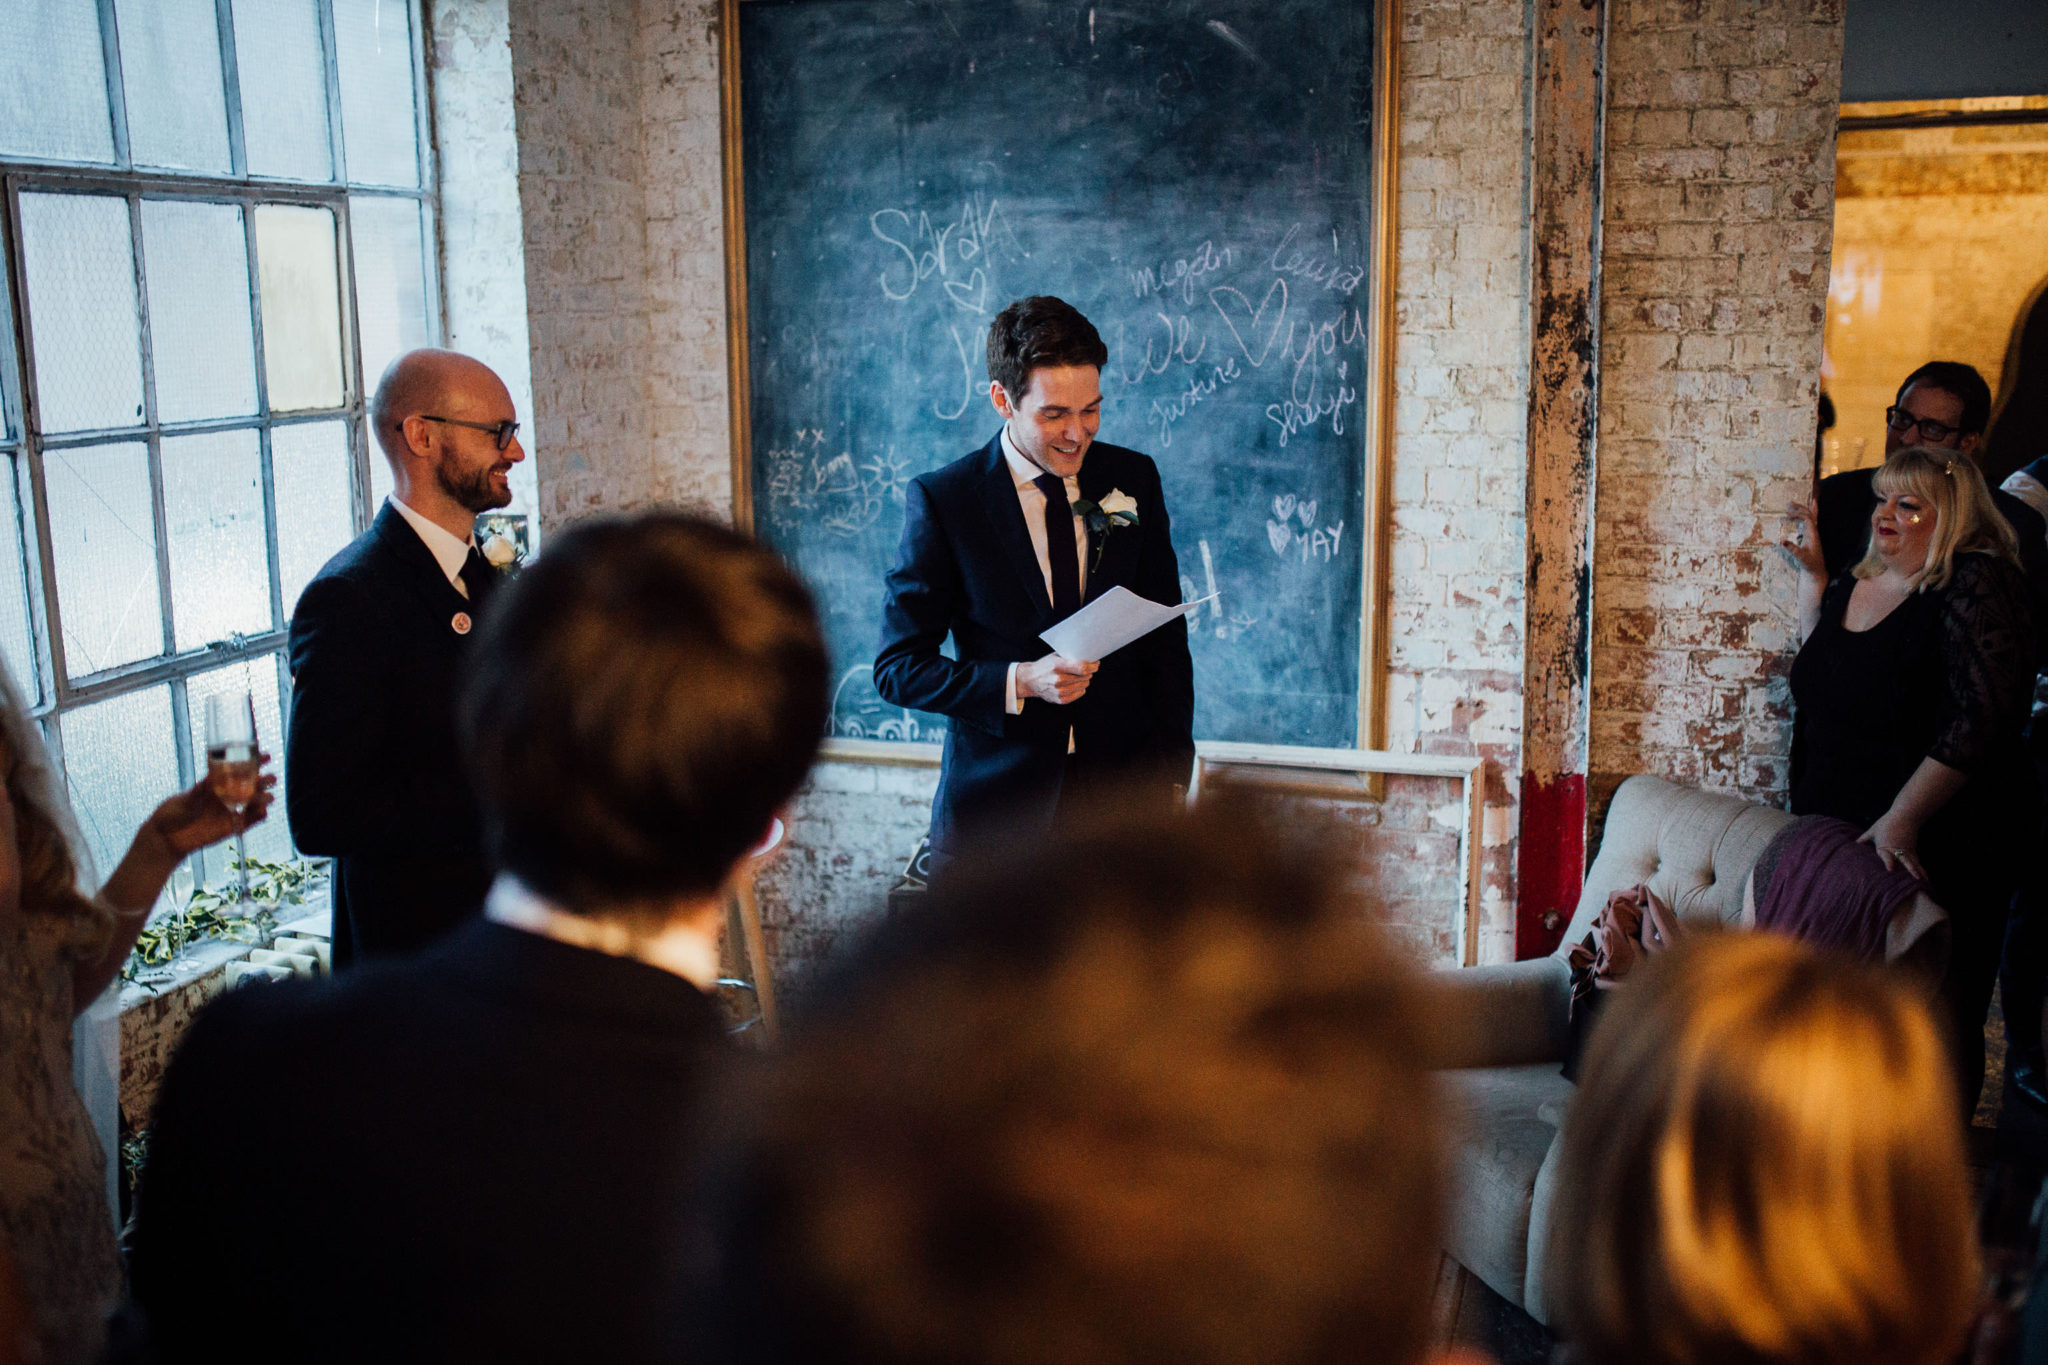 CANDIDS AT WAREHOUSE WEDDING AT ONE FRIENDLY PLACE LONDON DOCUMENTARY FUN WEDDING PHOTOGRAPHY